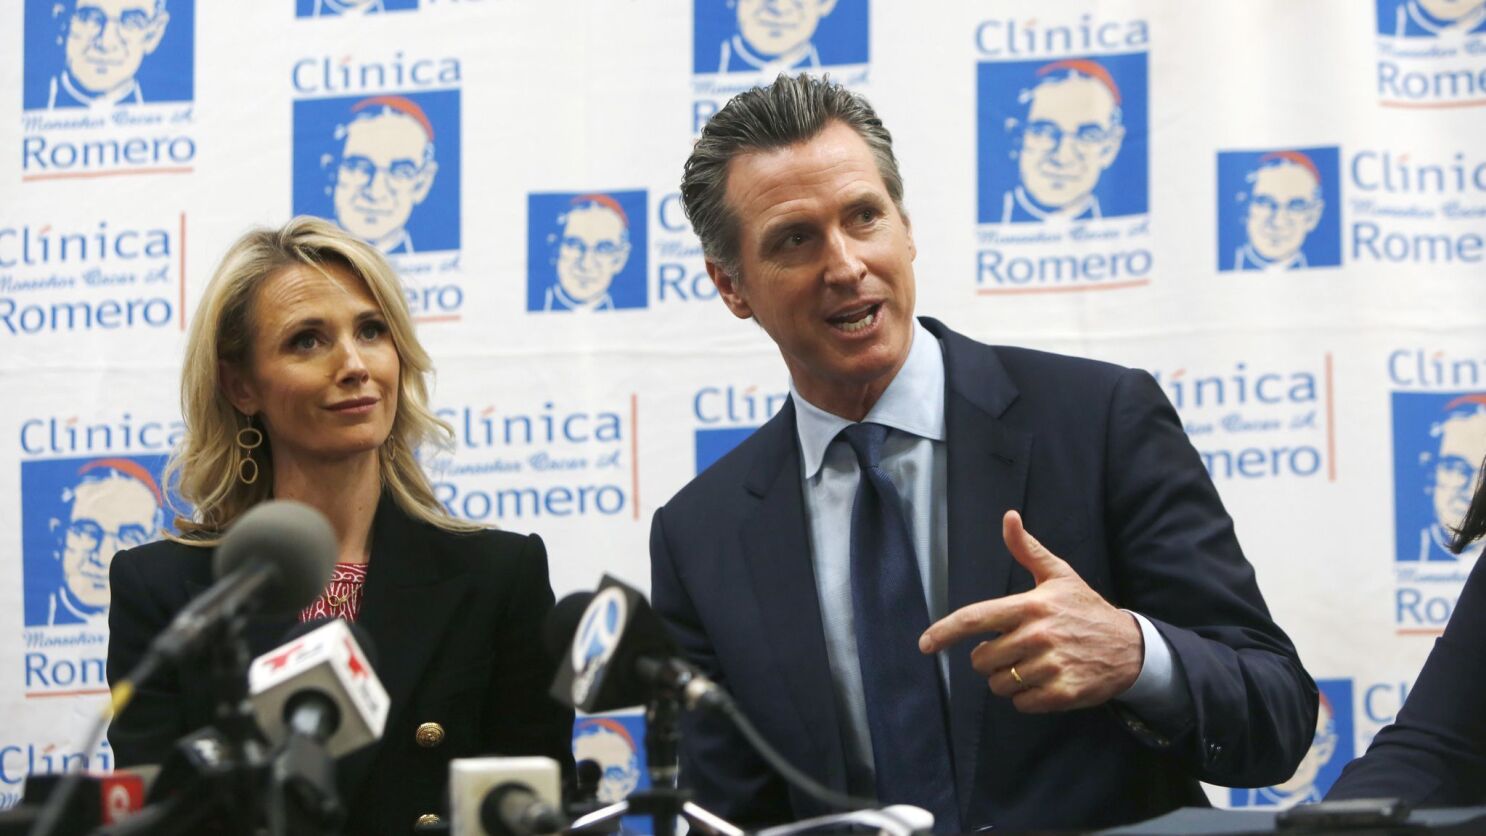 Newsom Says He Should Have Skipped Outdoor Dinner Amid Covid Los Angeles Times